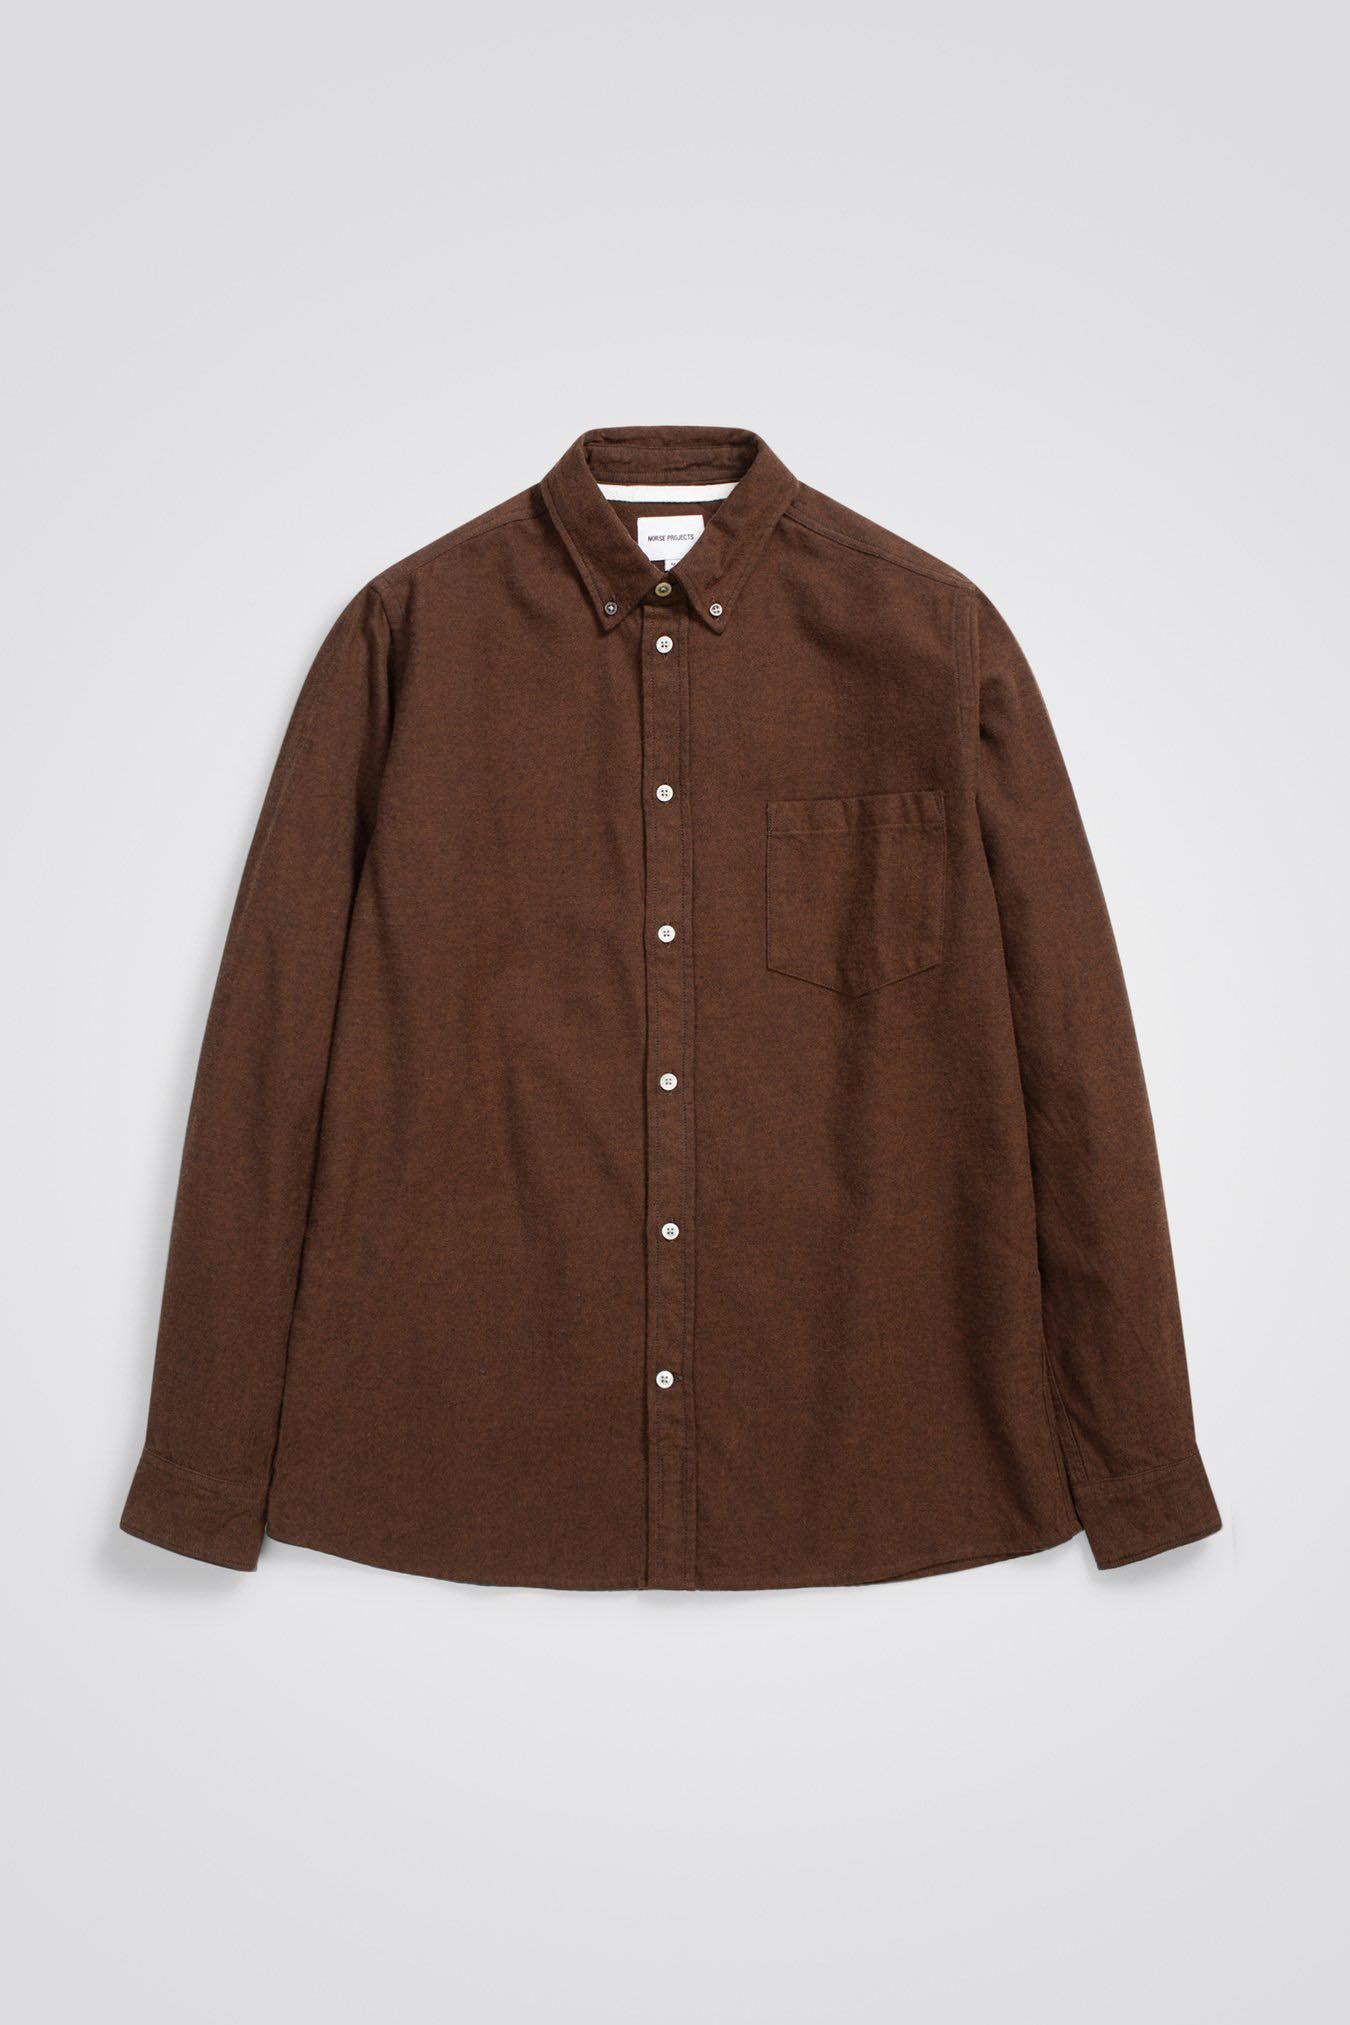 NORSE PROJECTS ANTON BRUSHED FLANNEL -  RUST BROWN